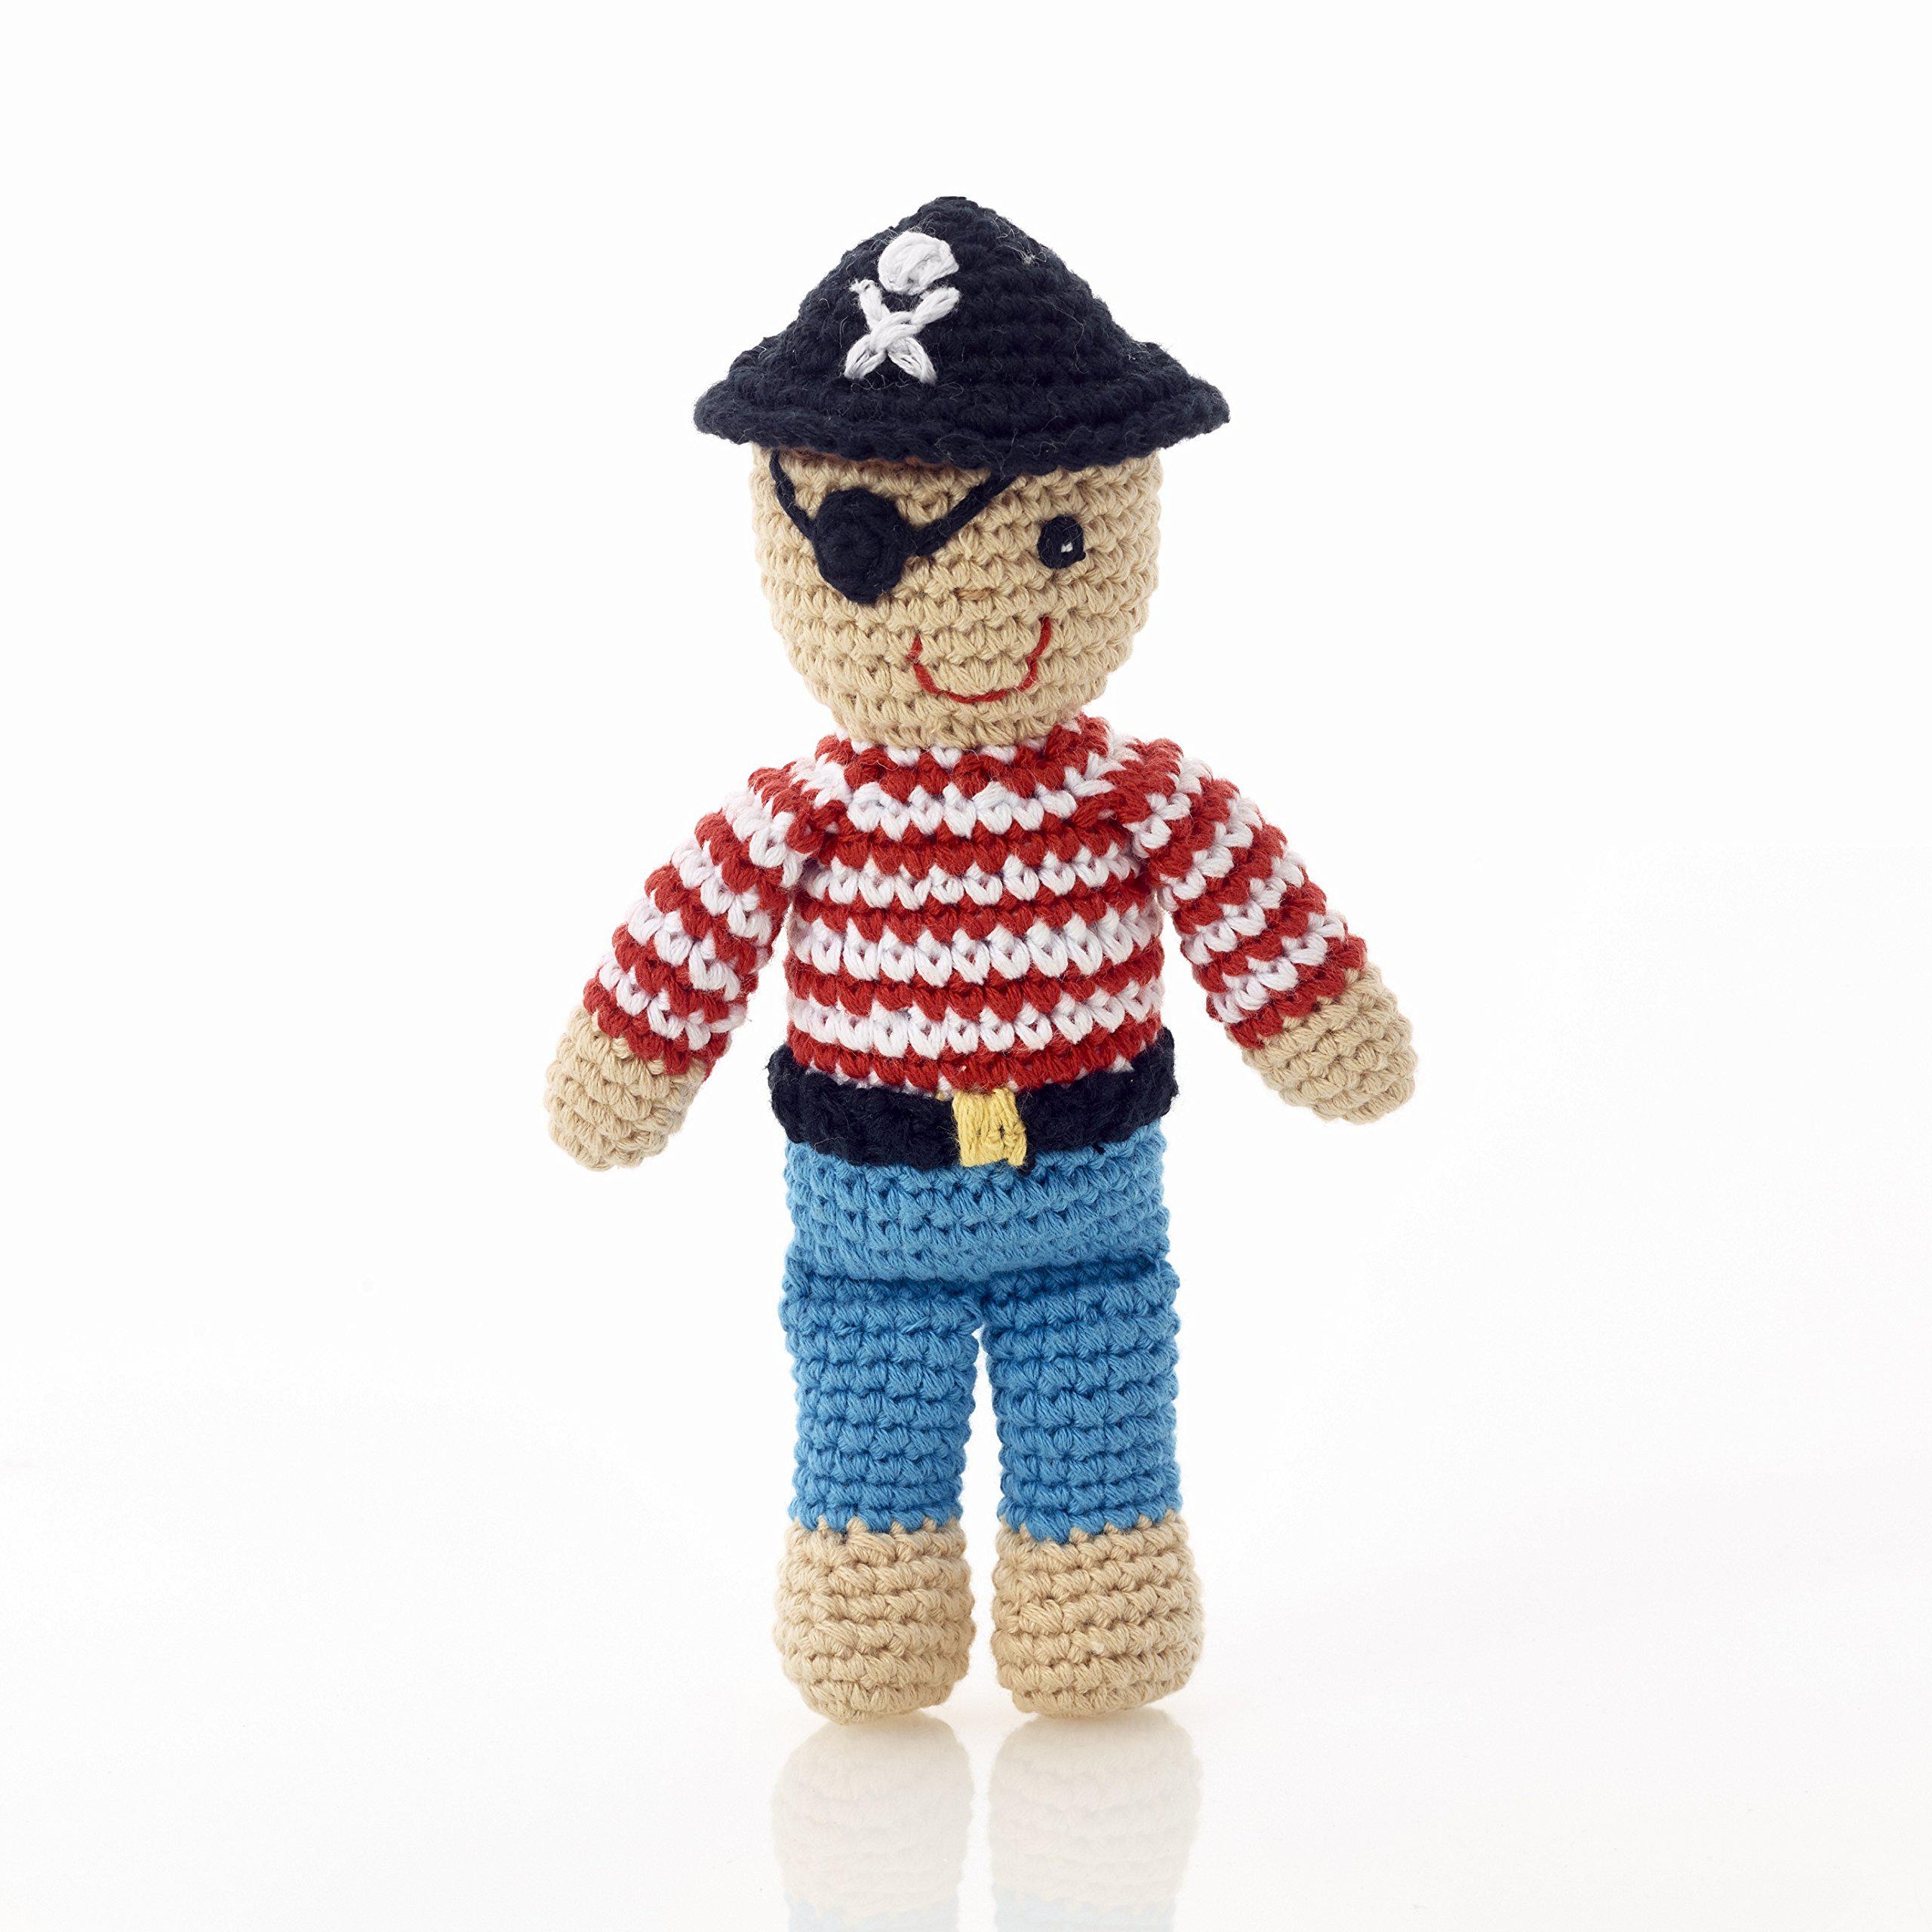 pebble fair trade hand made plushtoy - pirate rattle